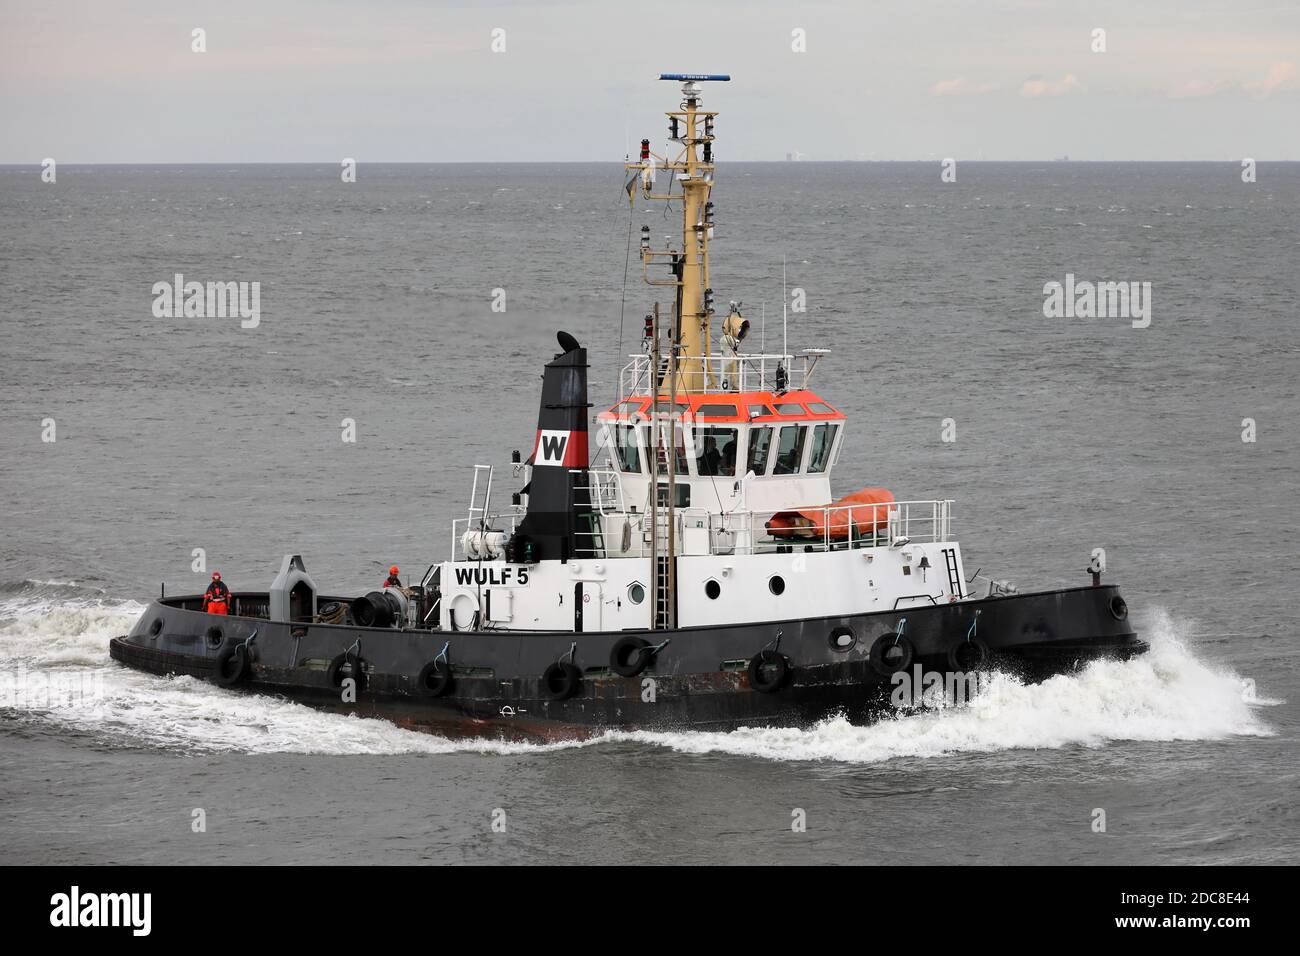 The port tug Wulf 5 will work in the port of Cuxhaven on August 21, 2020. Stock Photo